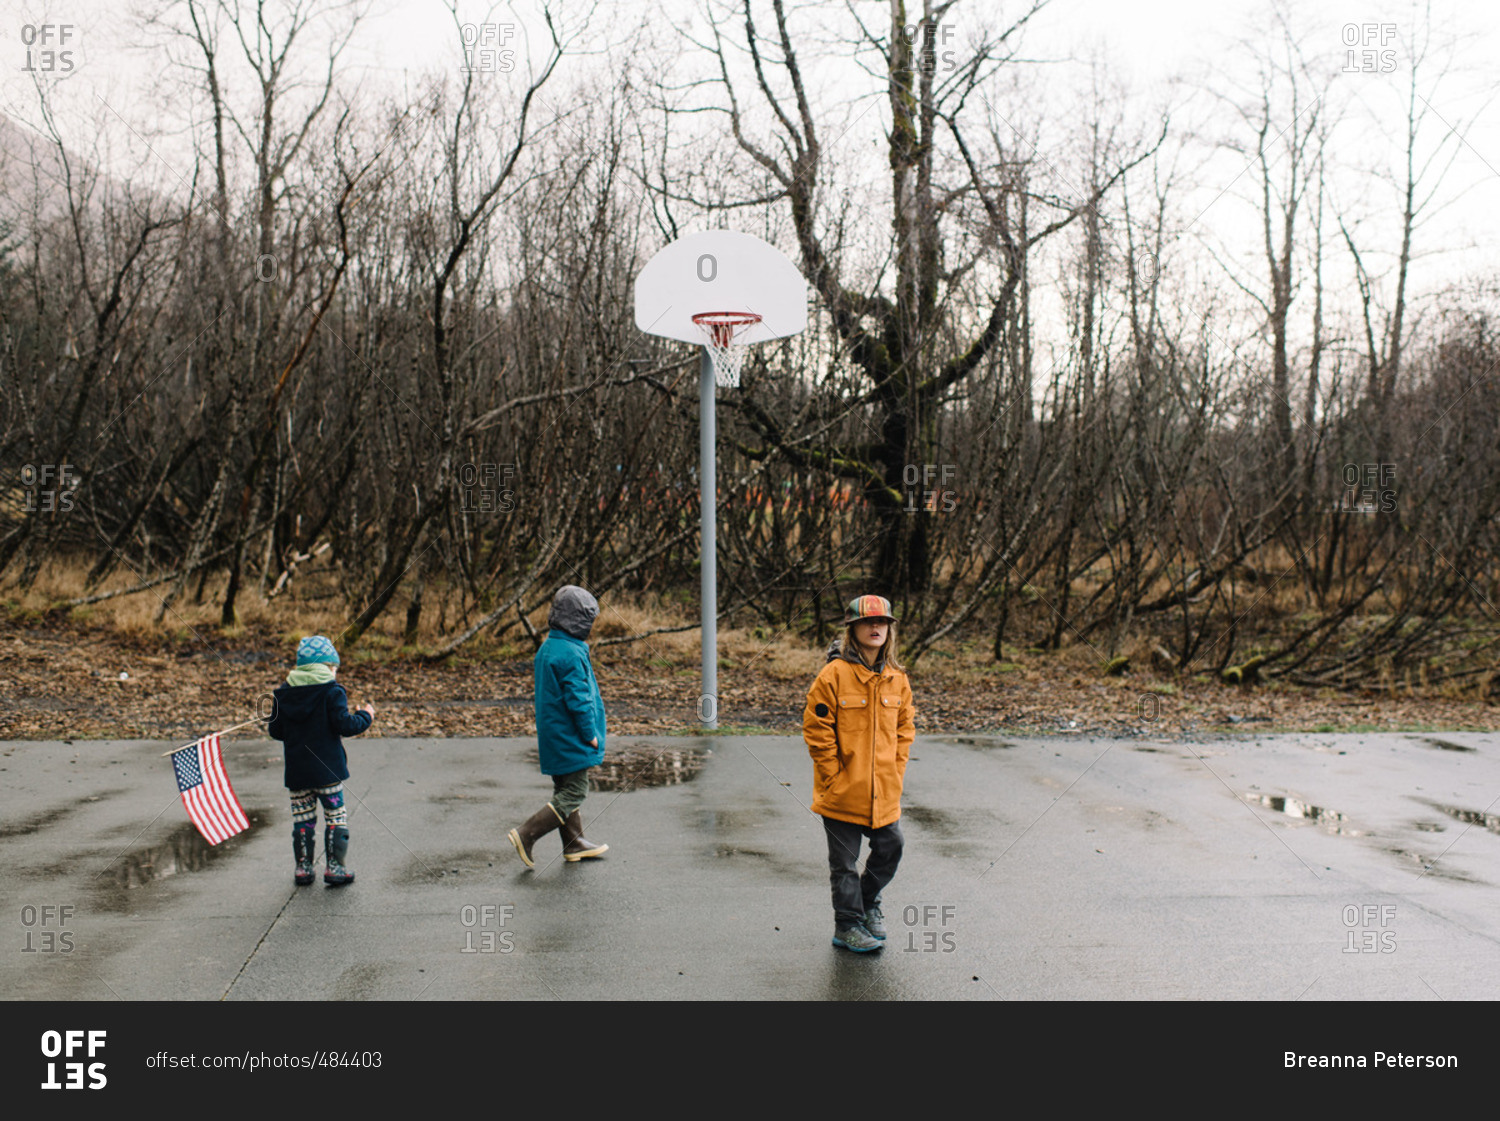 Children playing on basketball court in rainy weather